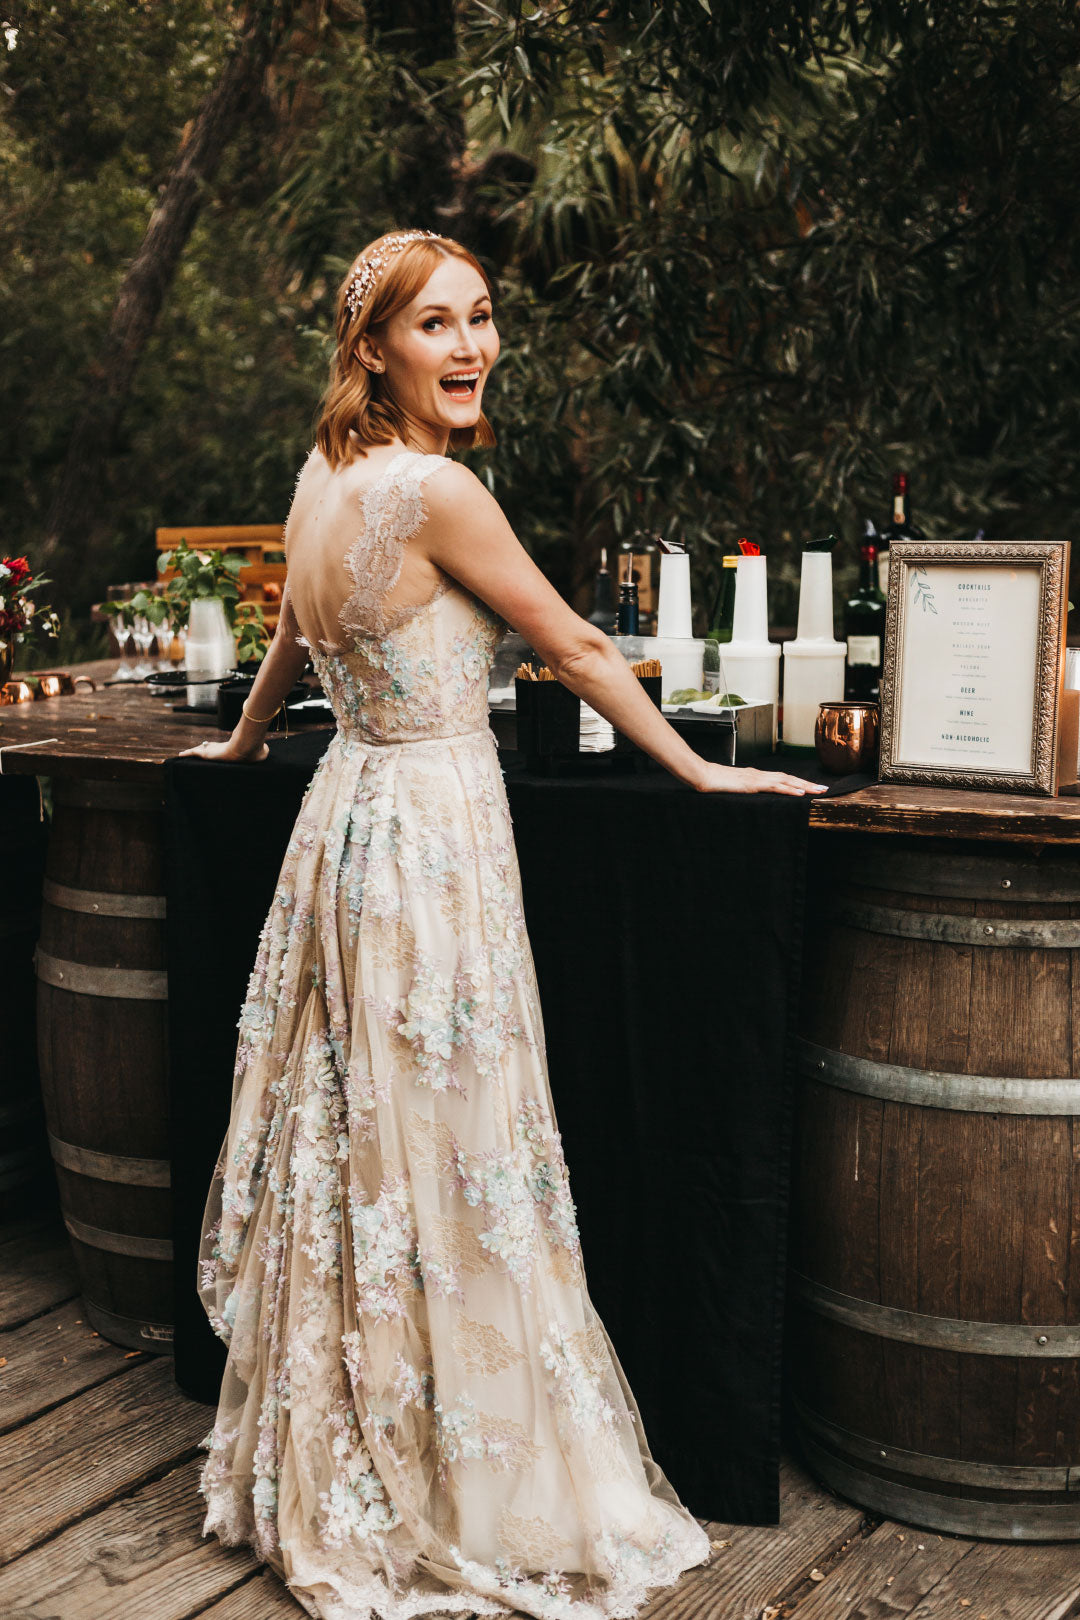 Bride in Ophelia colorful wedding dress by Claire Pettibone